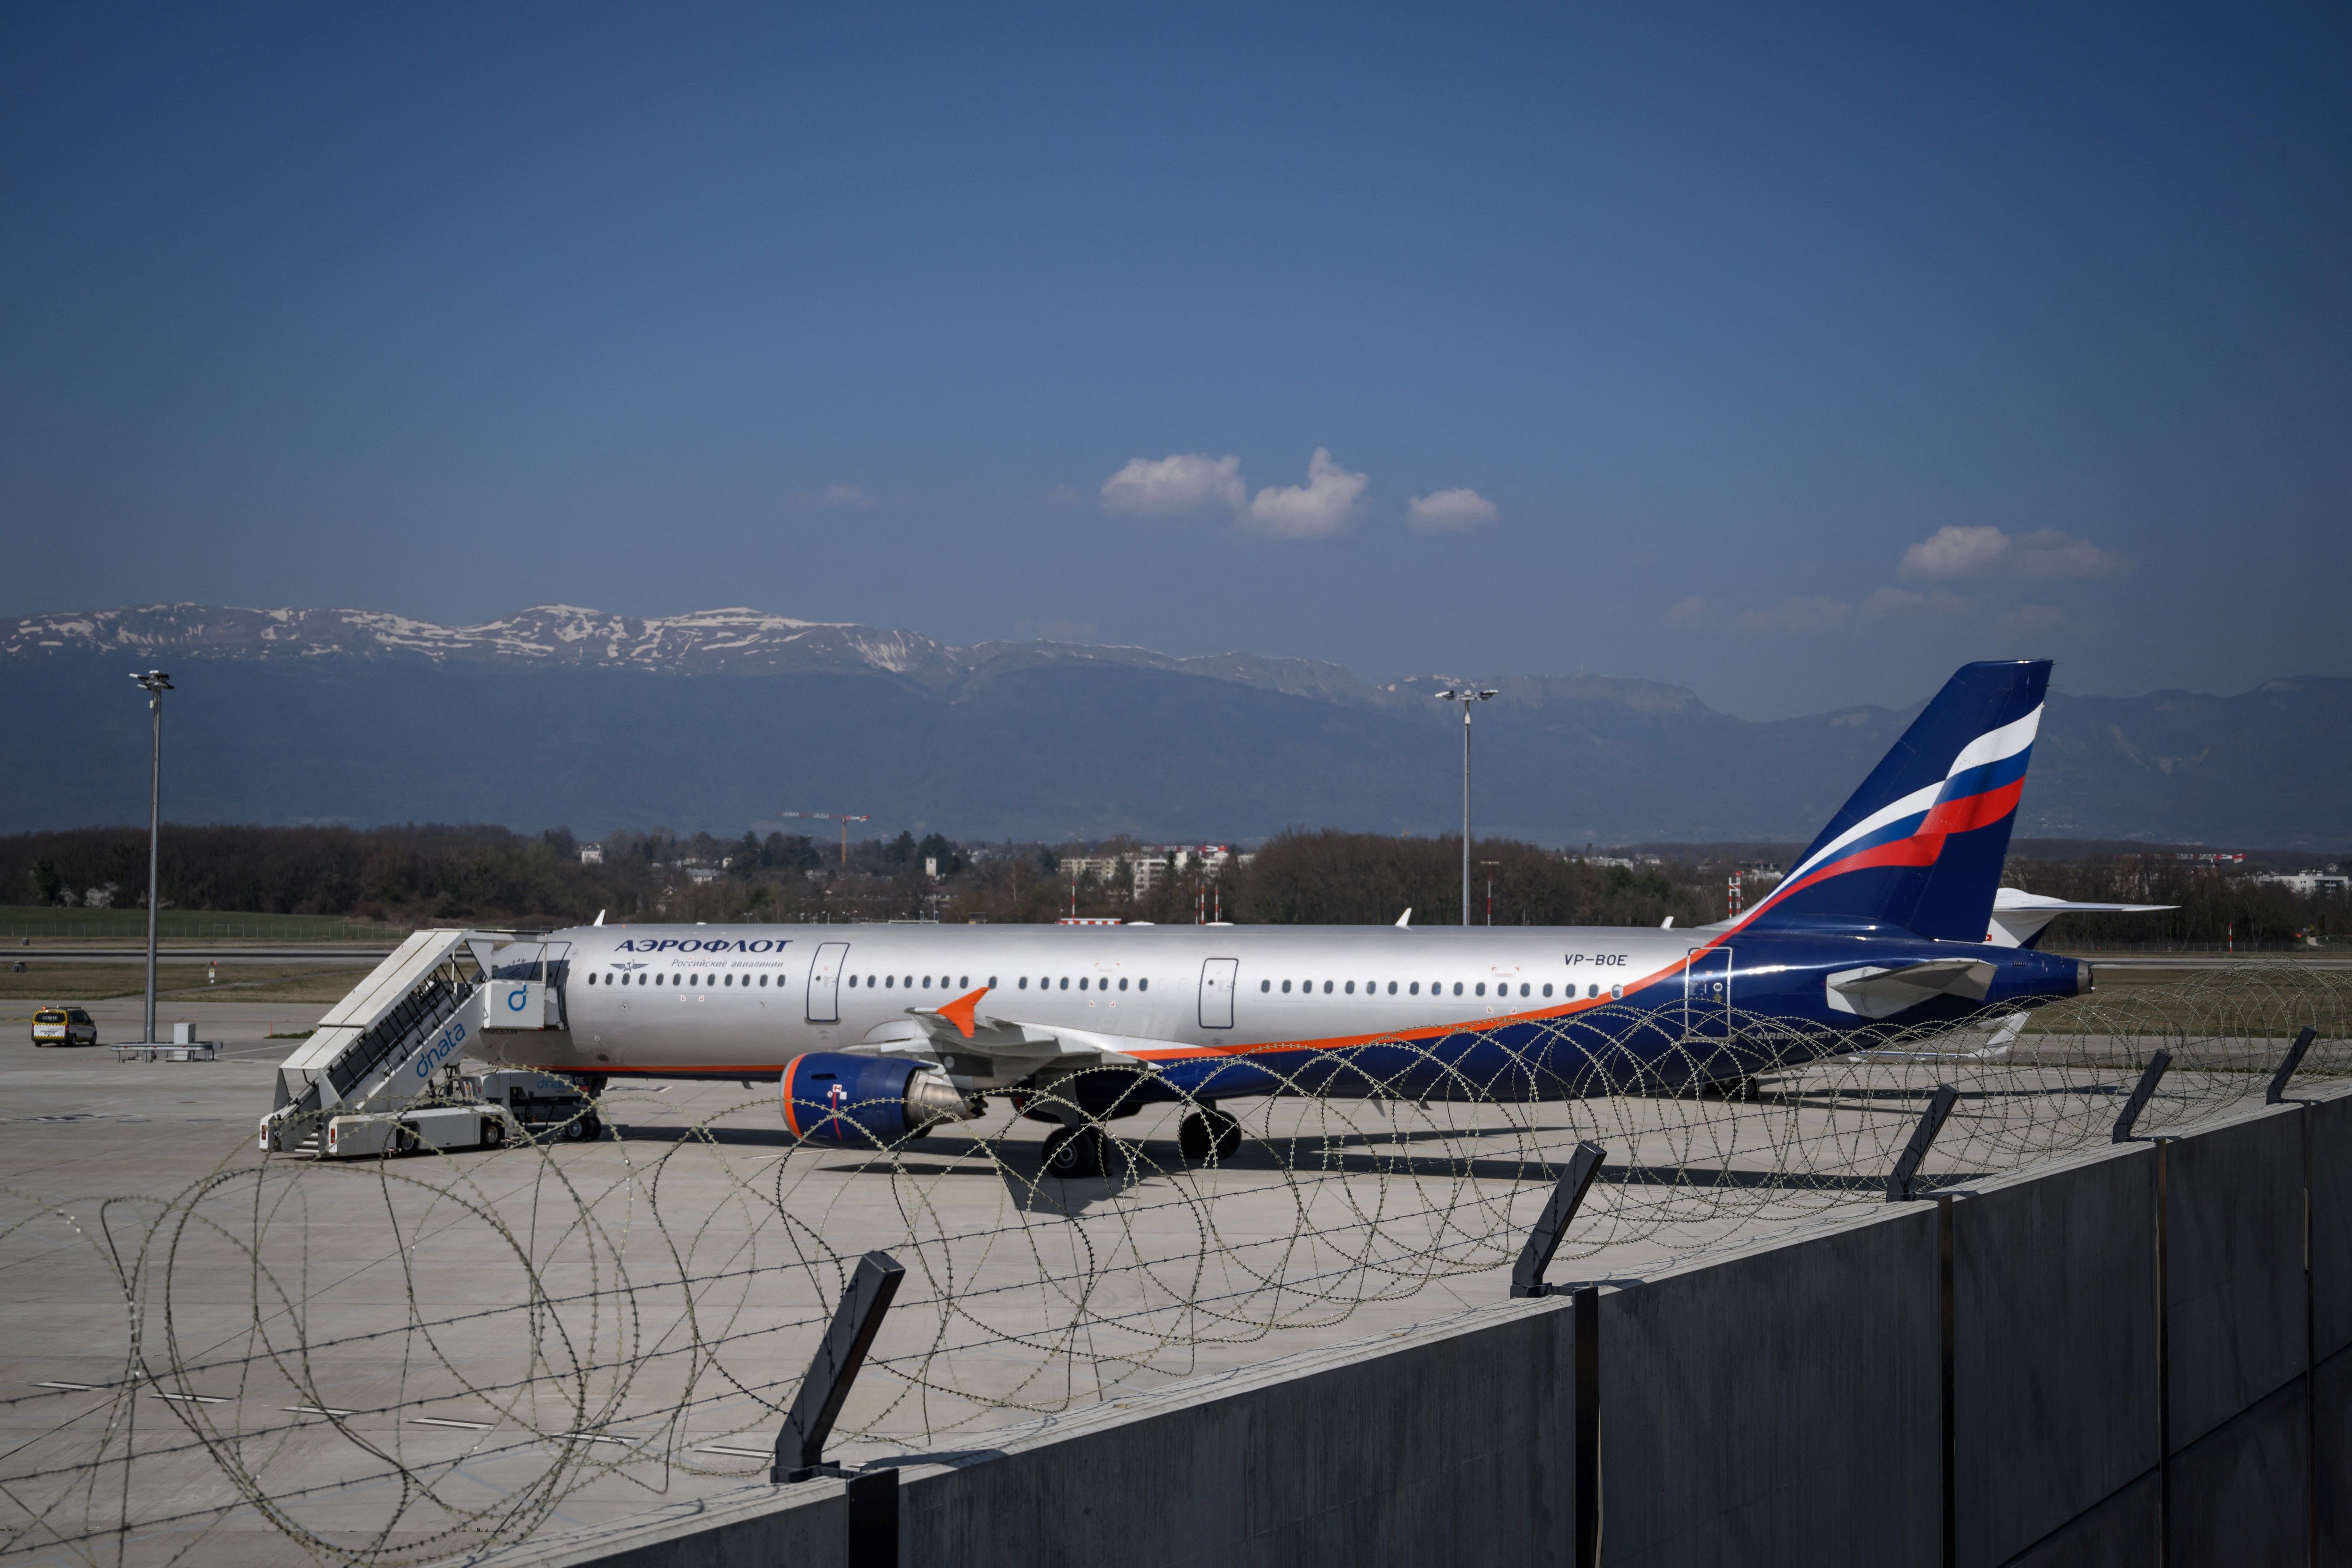 An Airbus A321-211 aircraft of Russian airline Aeroflot with registration VP-BOE (R) is seen in the long term parking for planes of Geneva Airport on March 25, 2022.